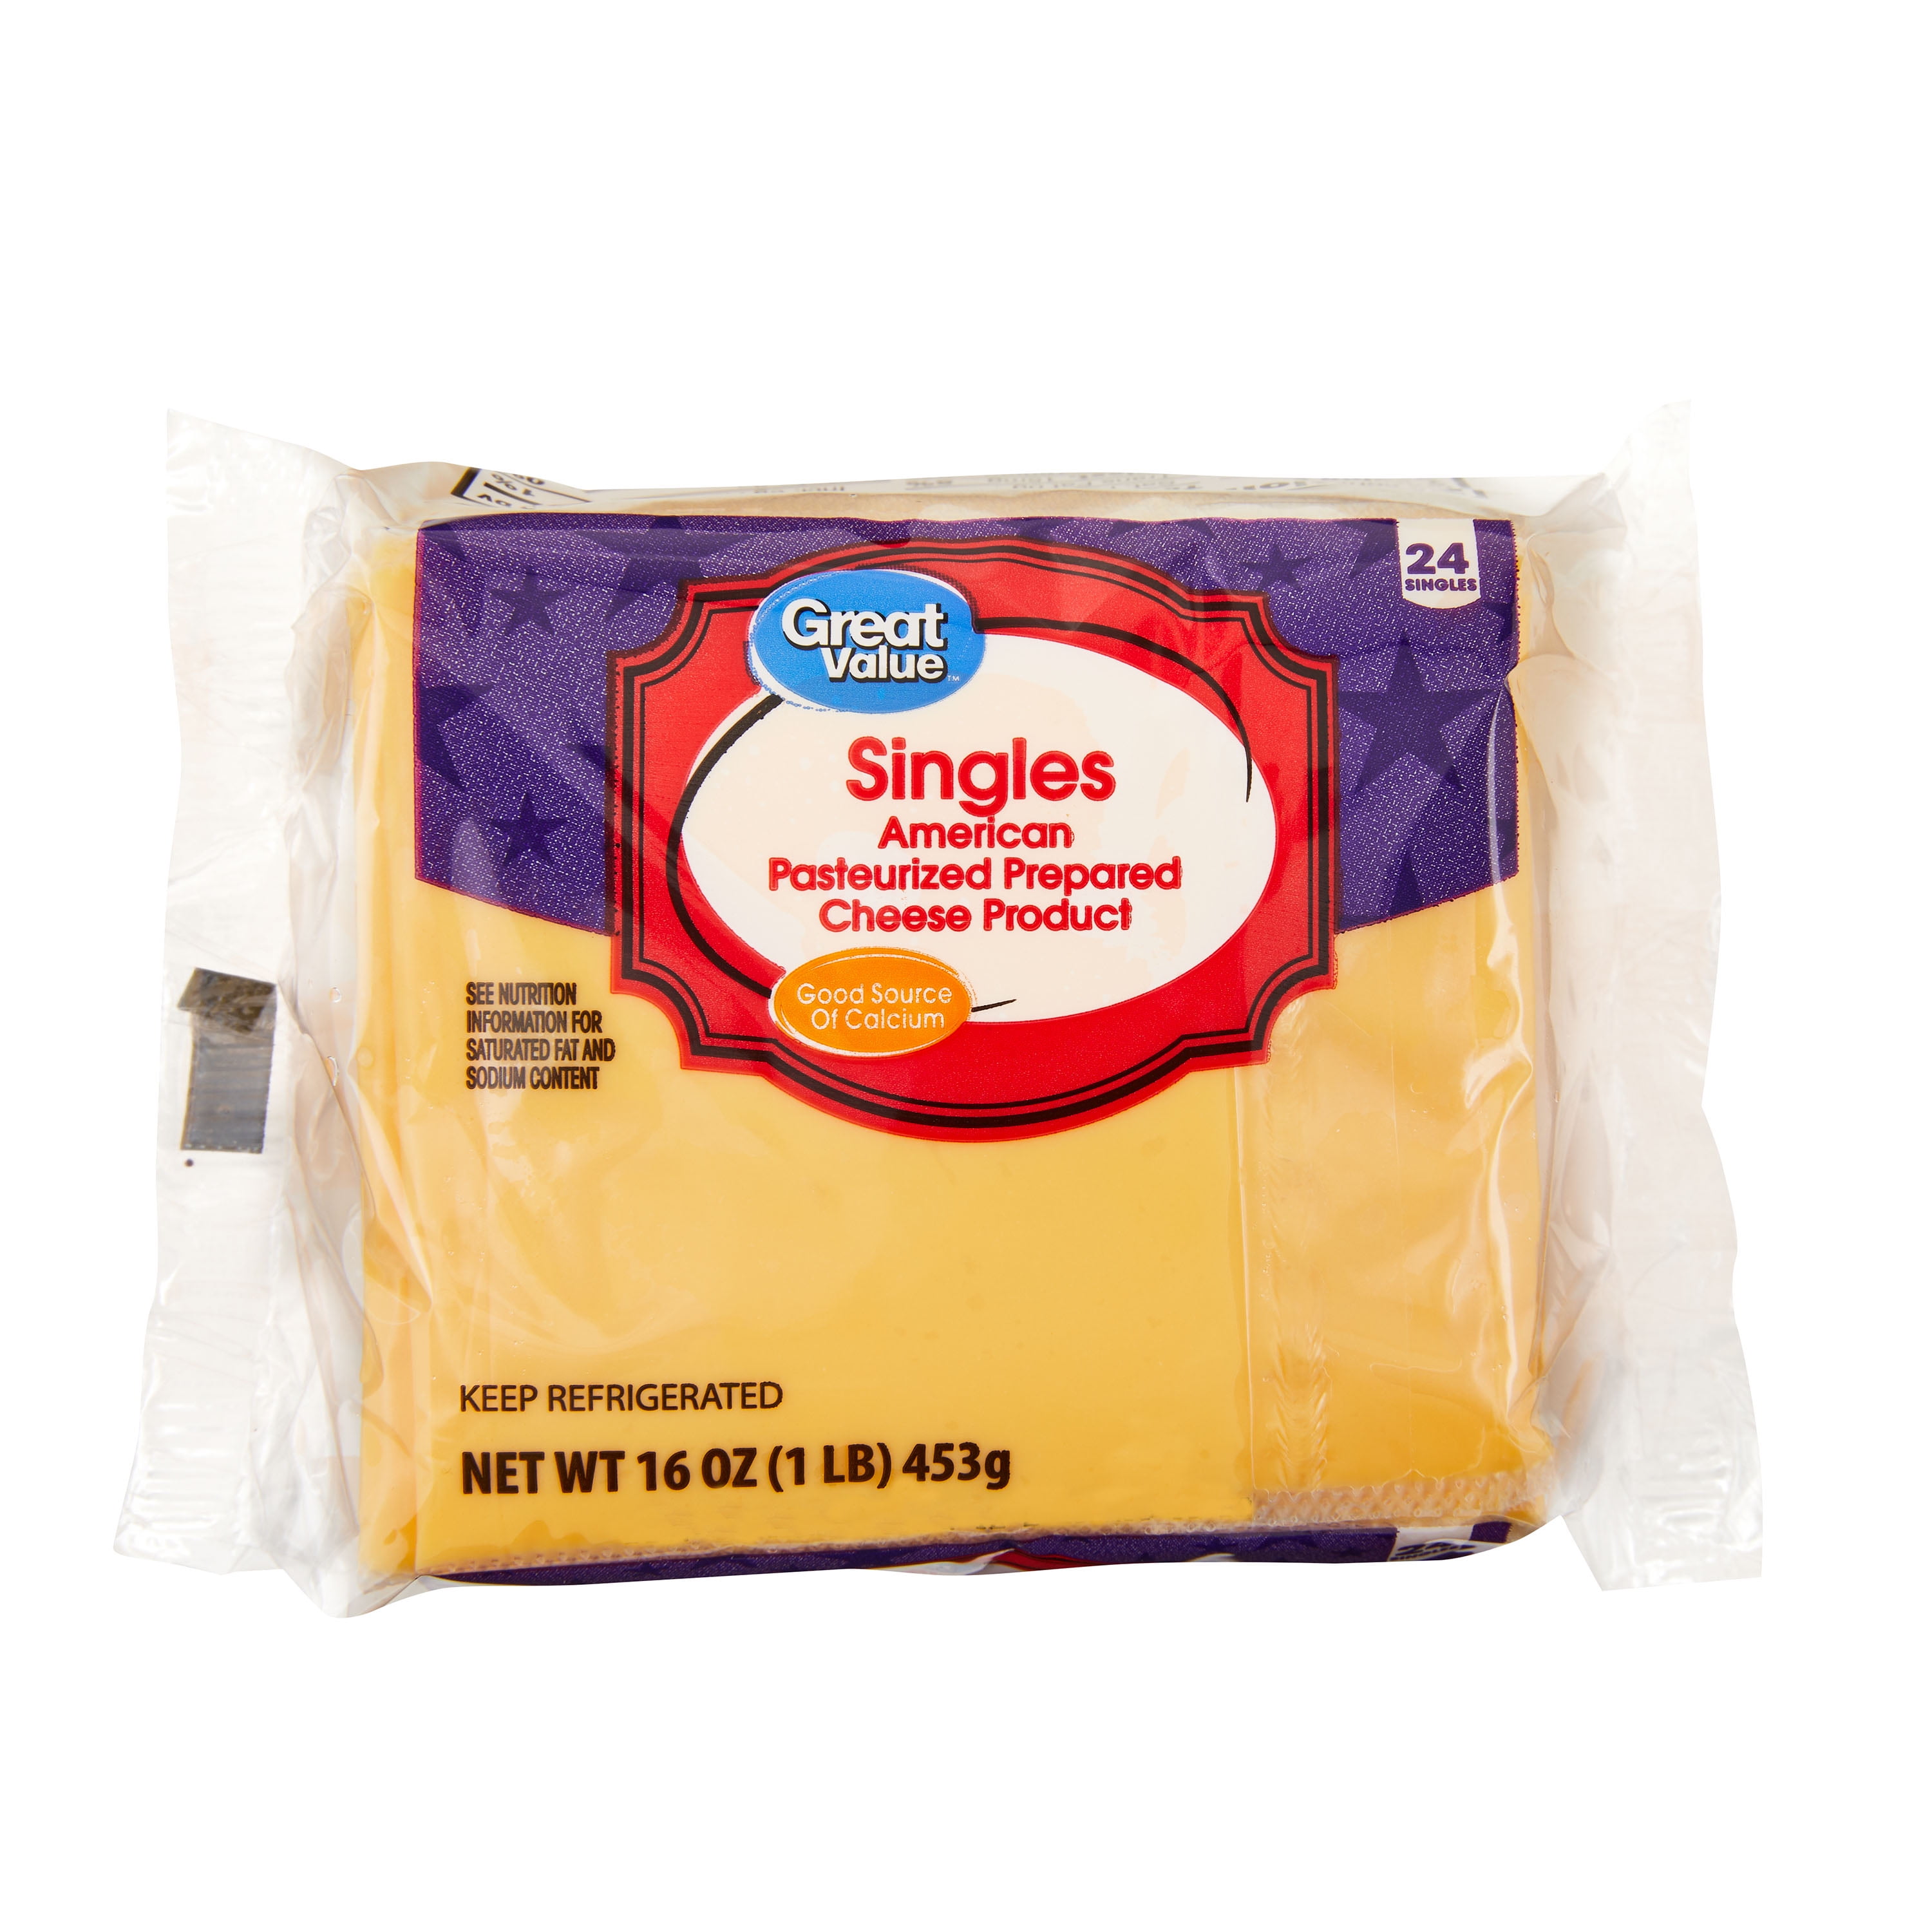 Great Value Singles American Pasteurized Prepared Cheese Product, 16 oz, 24 Count